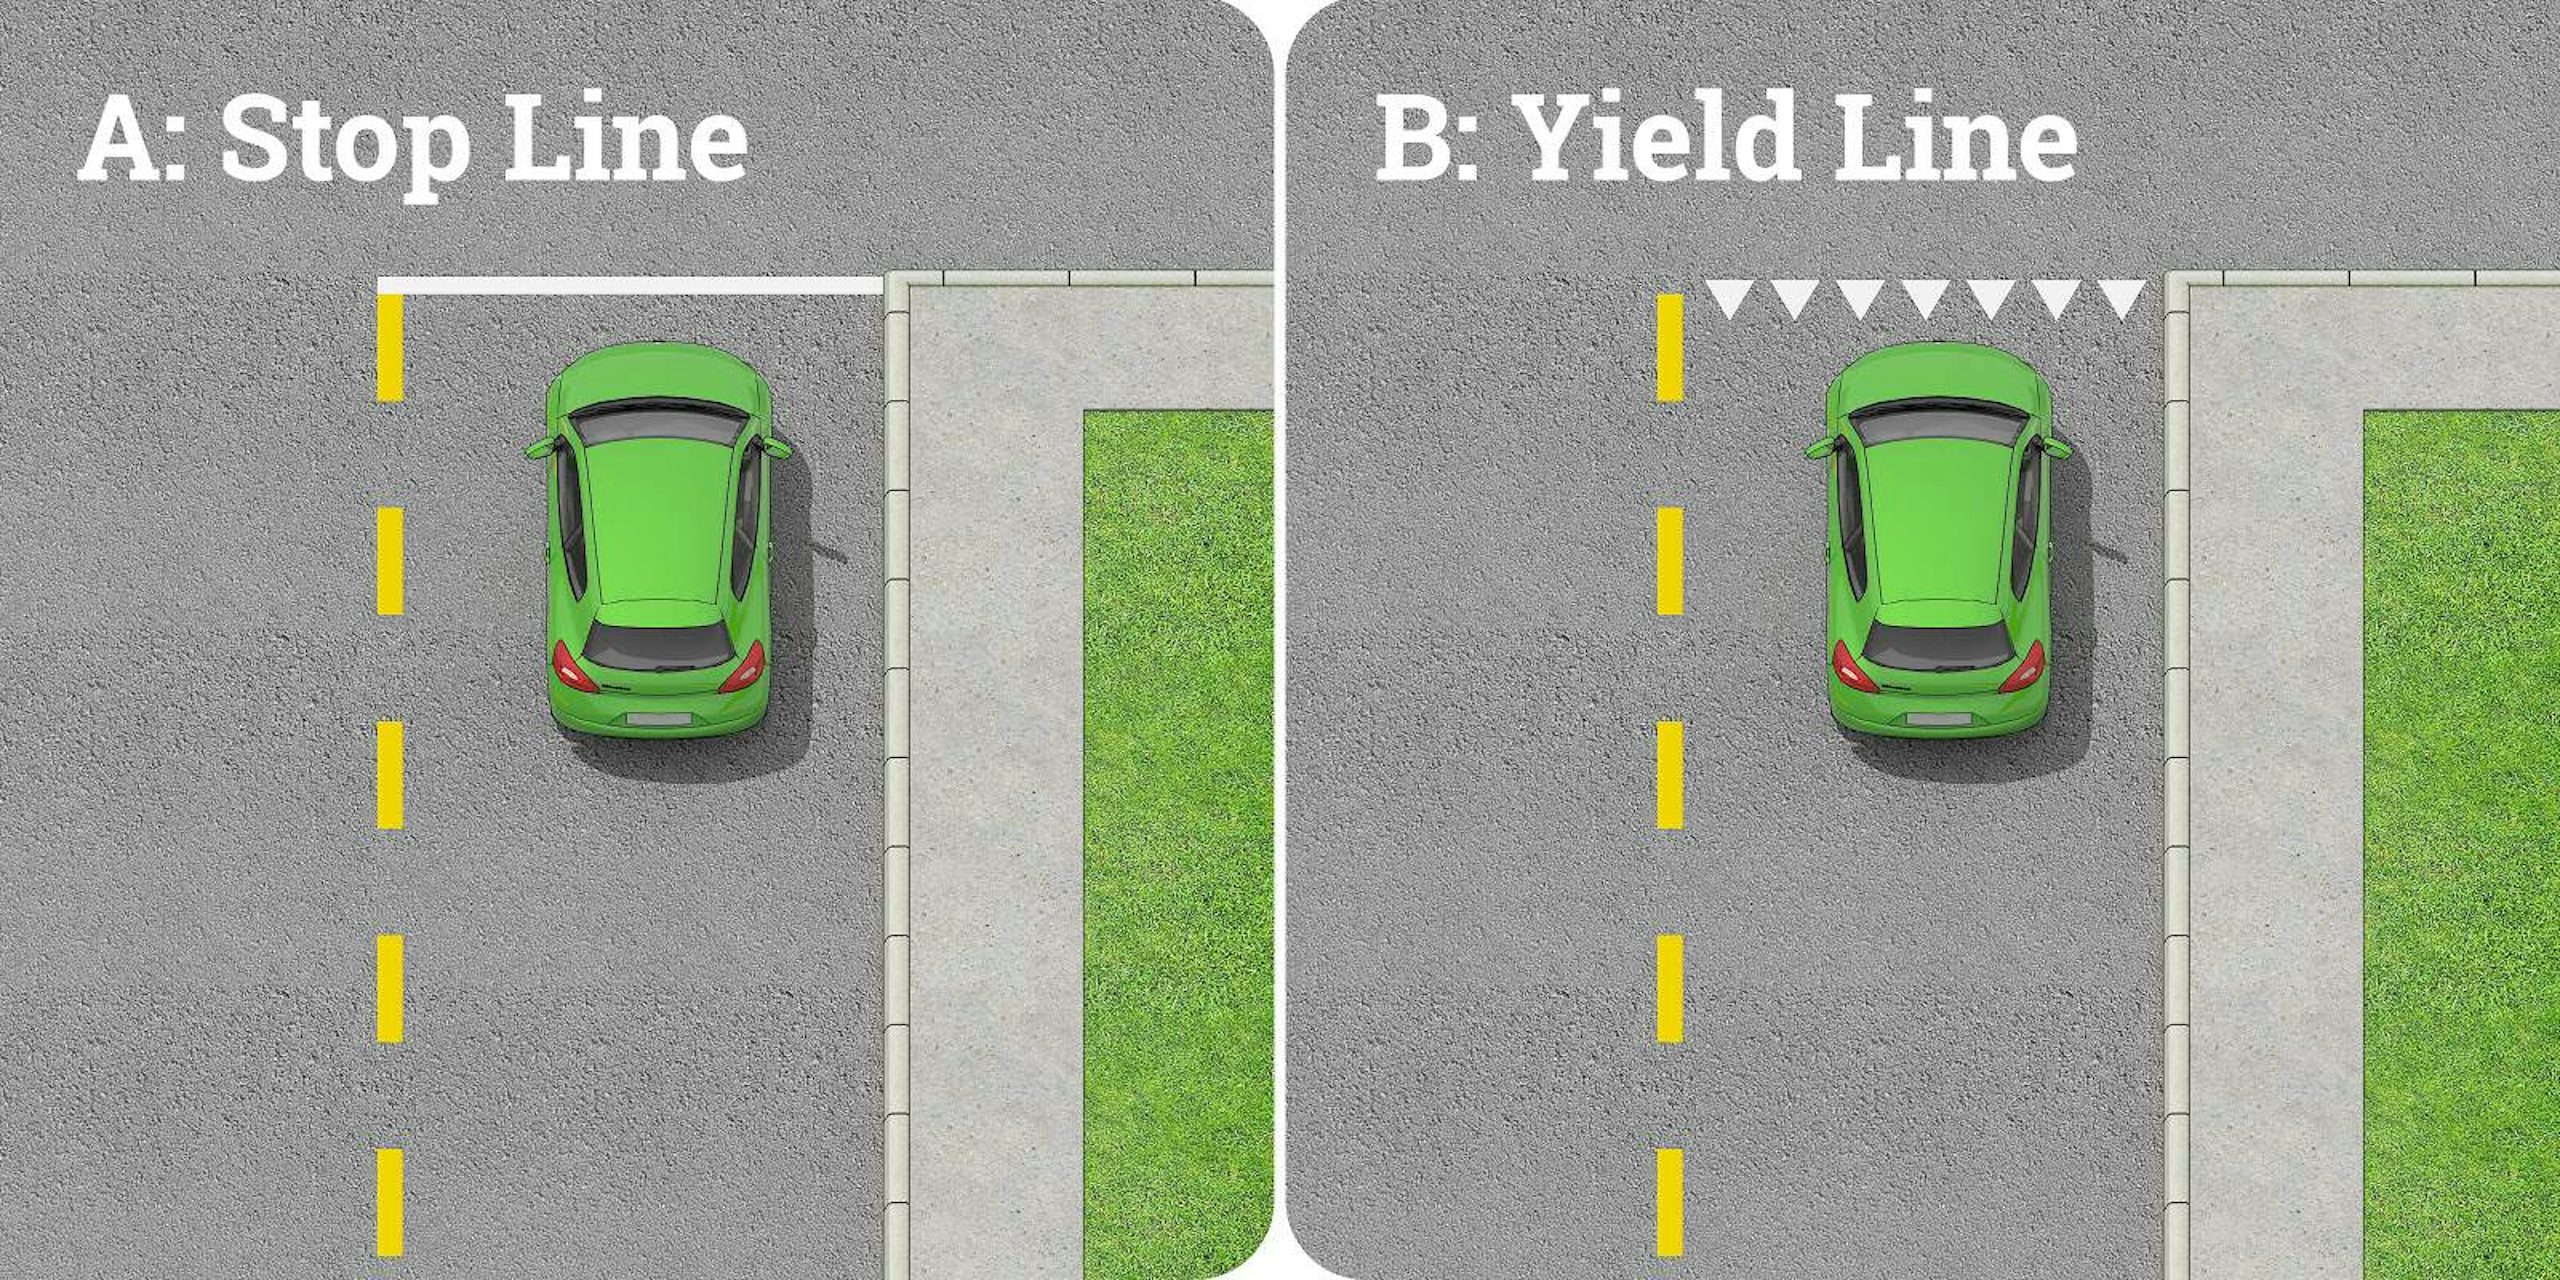 Stopping vs parking. What's the difference?